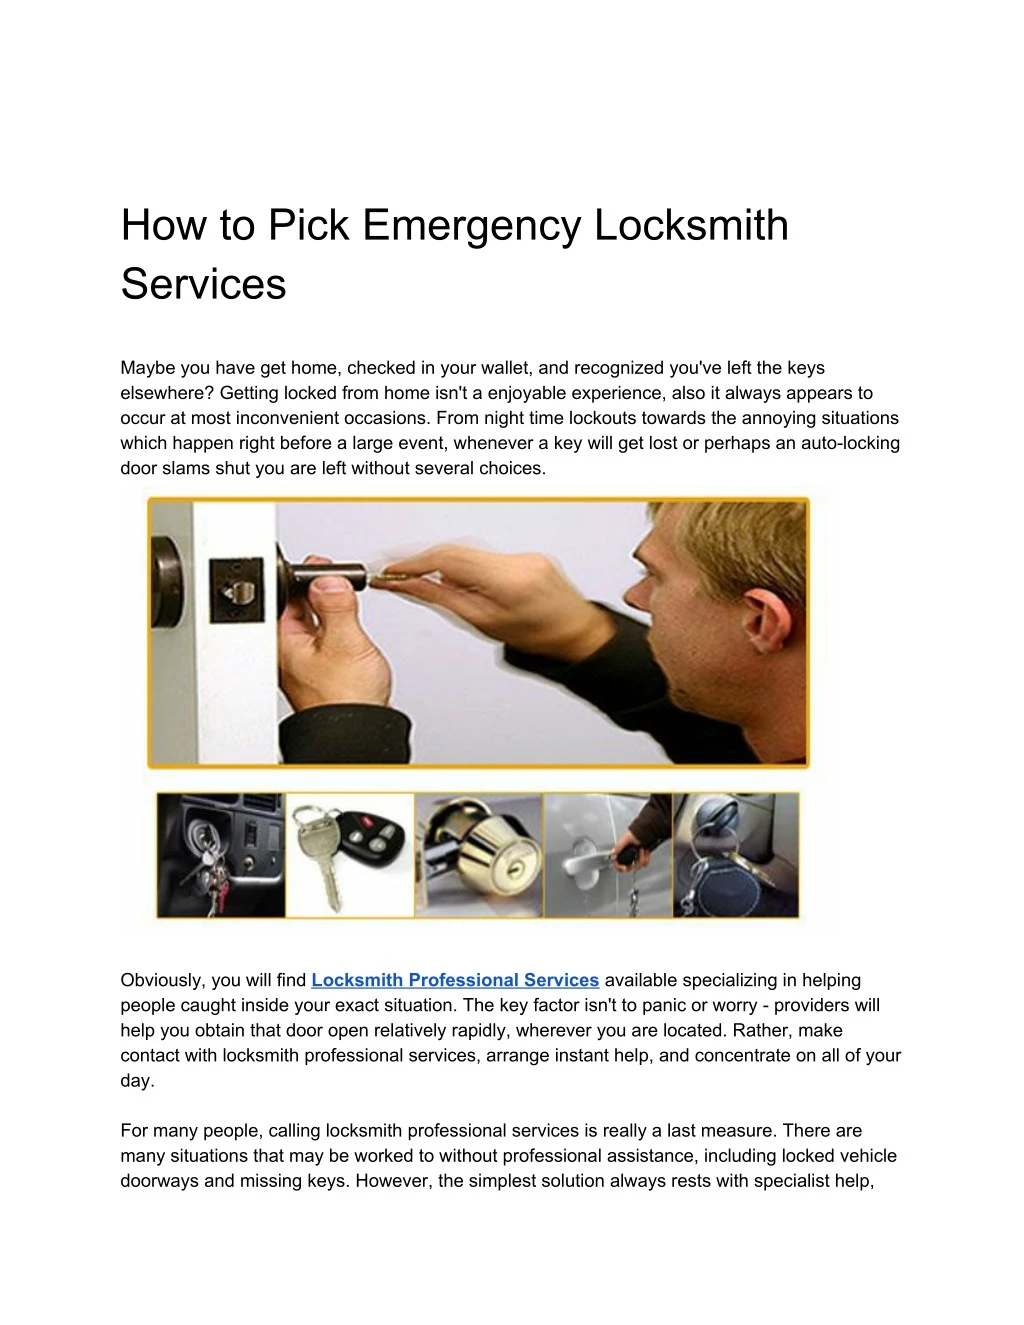 how to pick emergency locksmith services